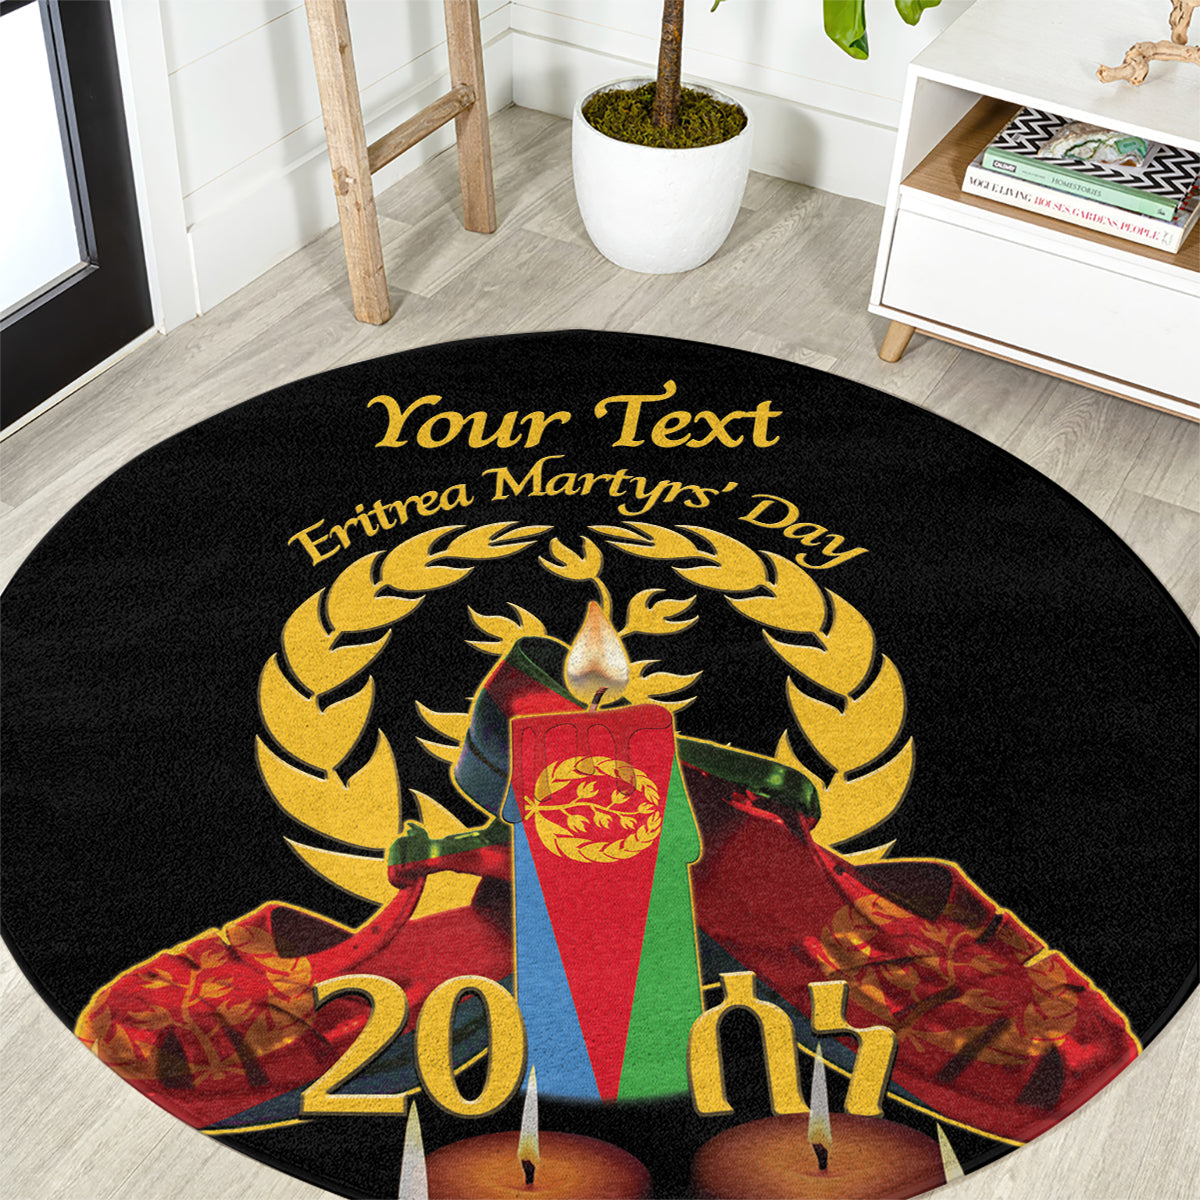 Custom Eritrea Martyrs' Day Round Carpet 20 June Shida Shoes With Candles - Black